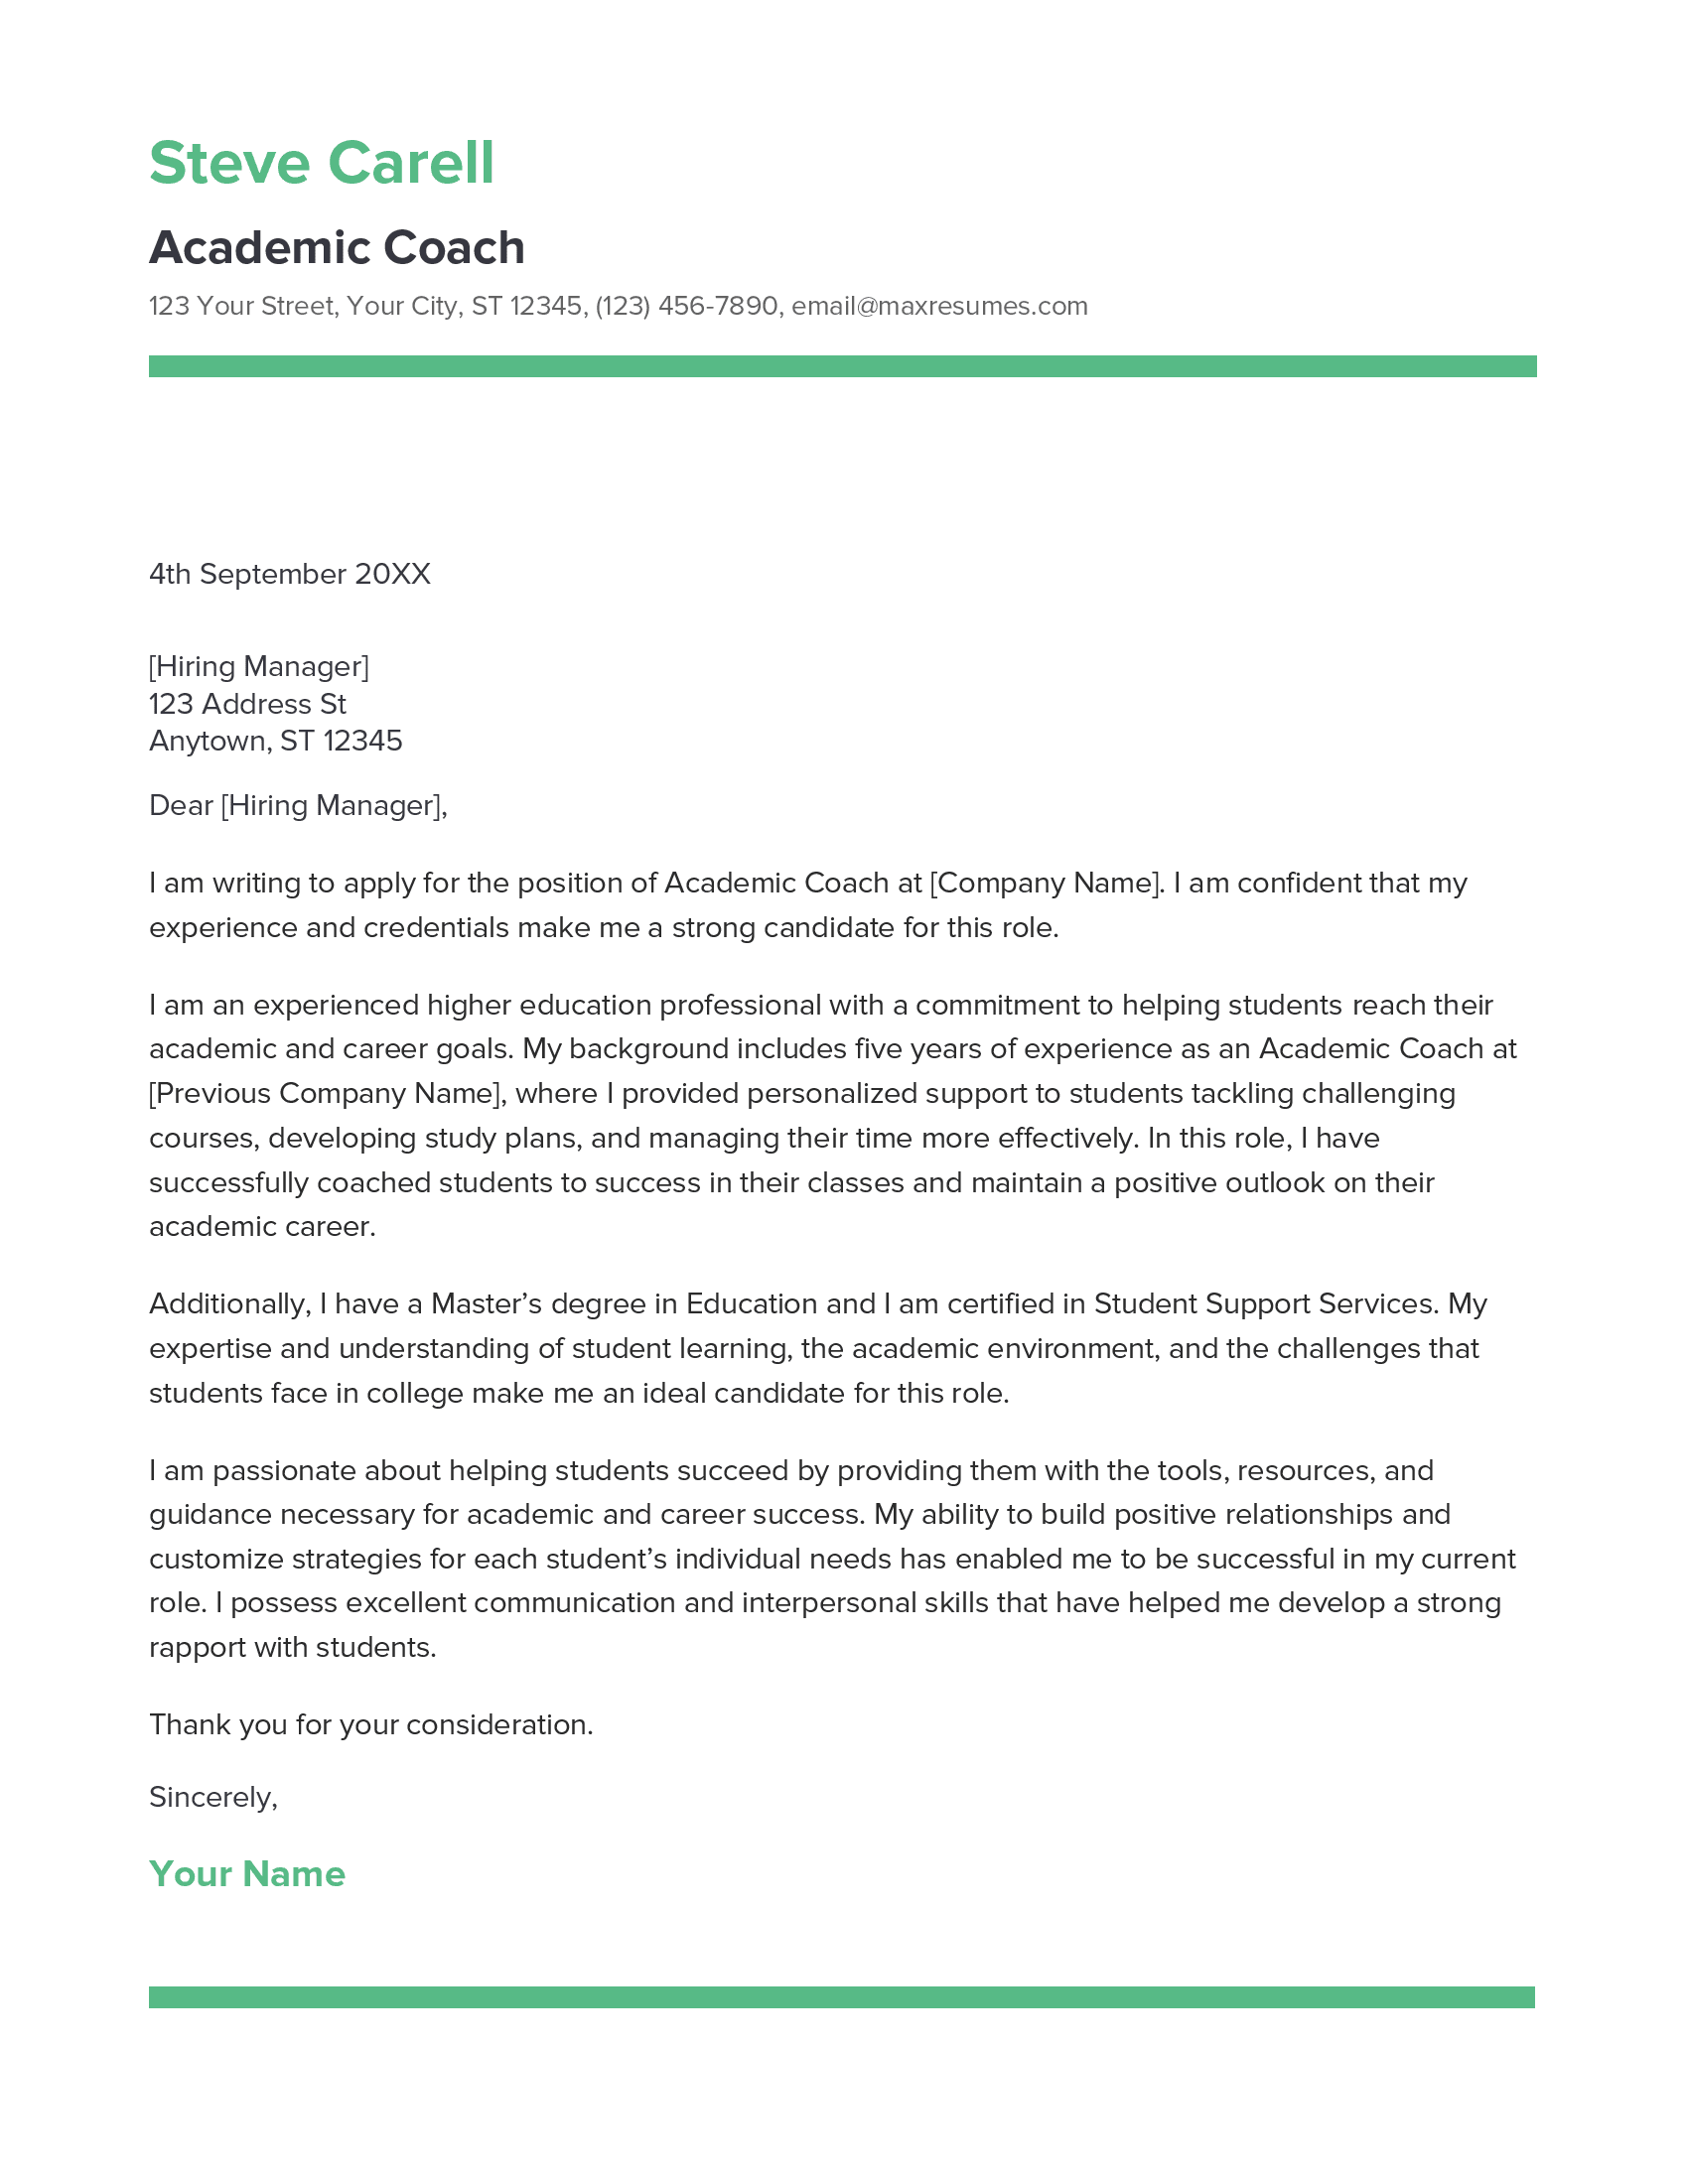 application letter for head coach